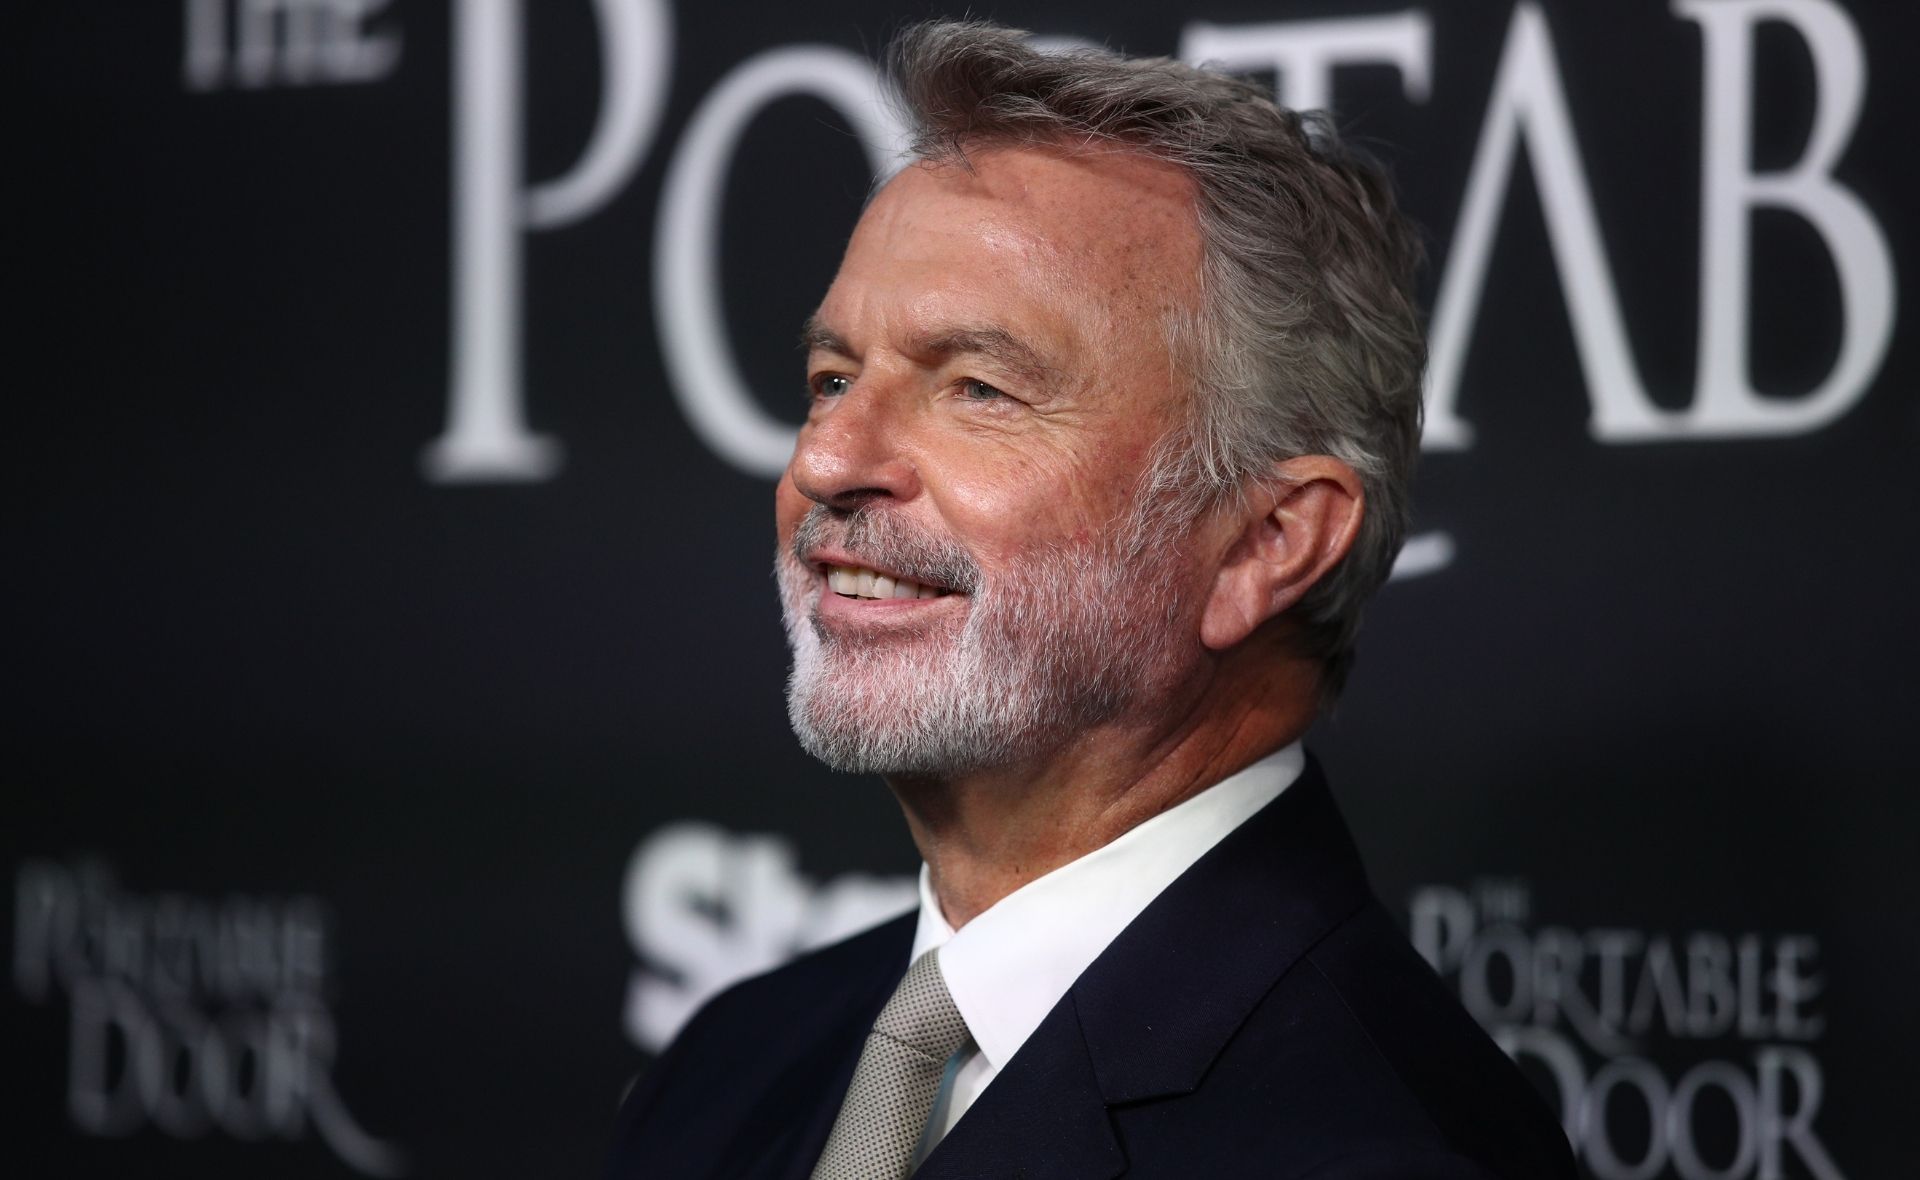 Sam Neill is “firmly in remission” after his first chemotherapy treatment sadly failed